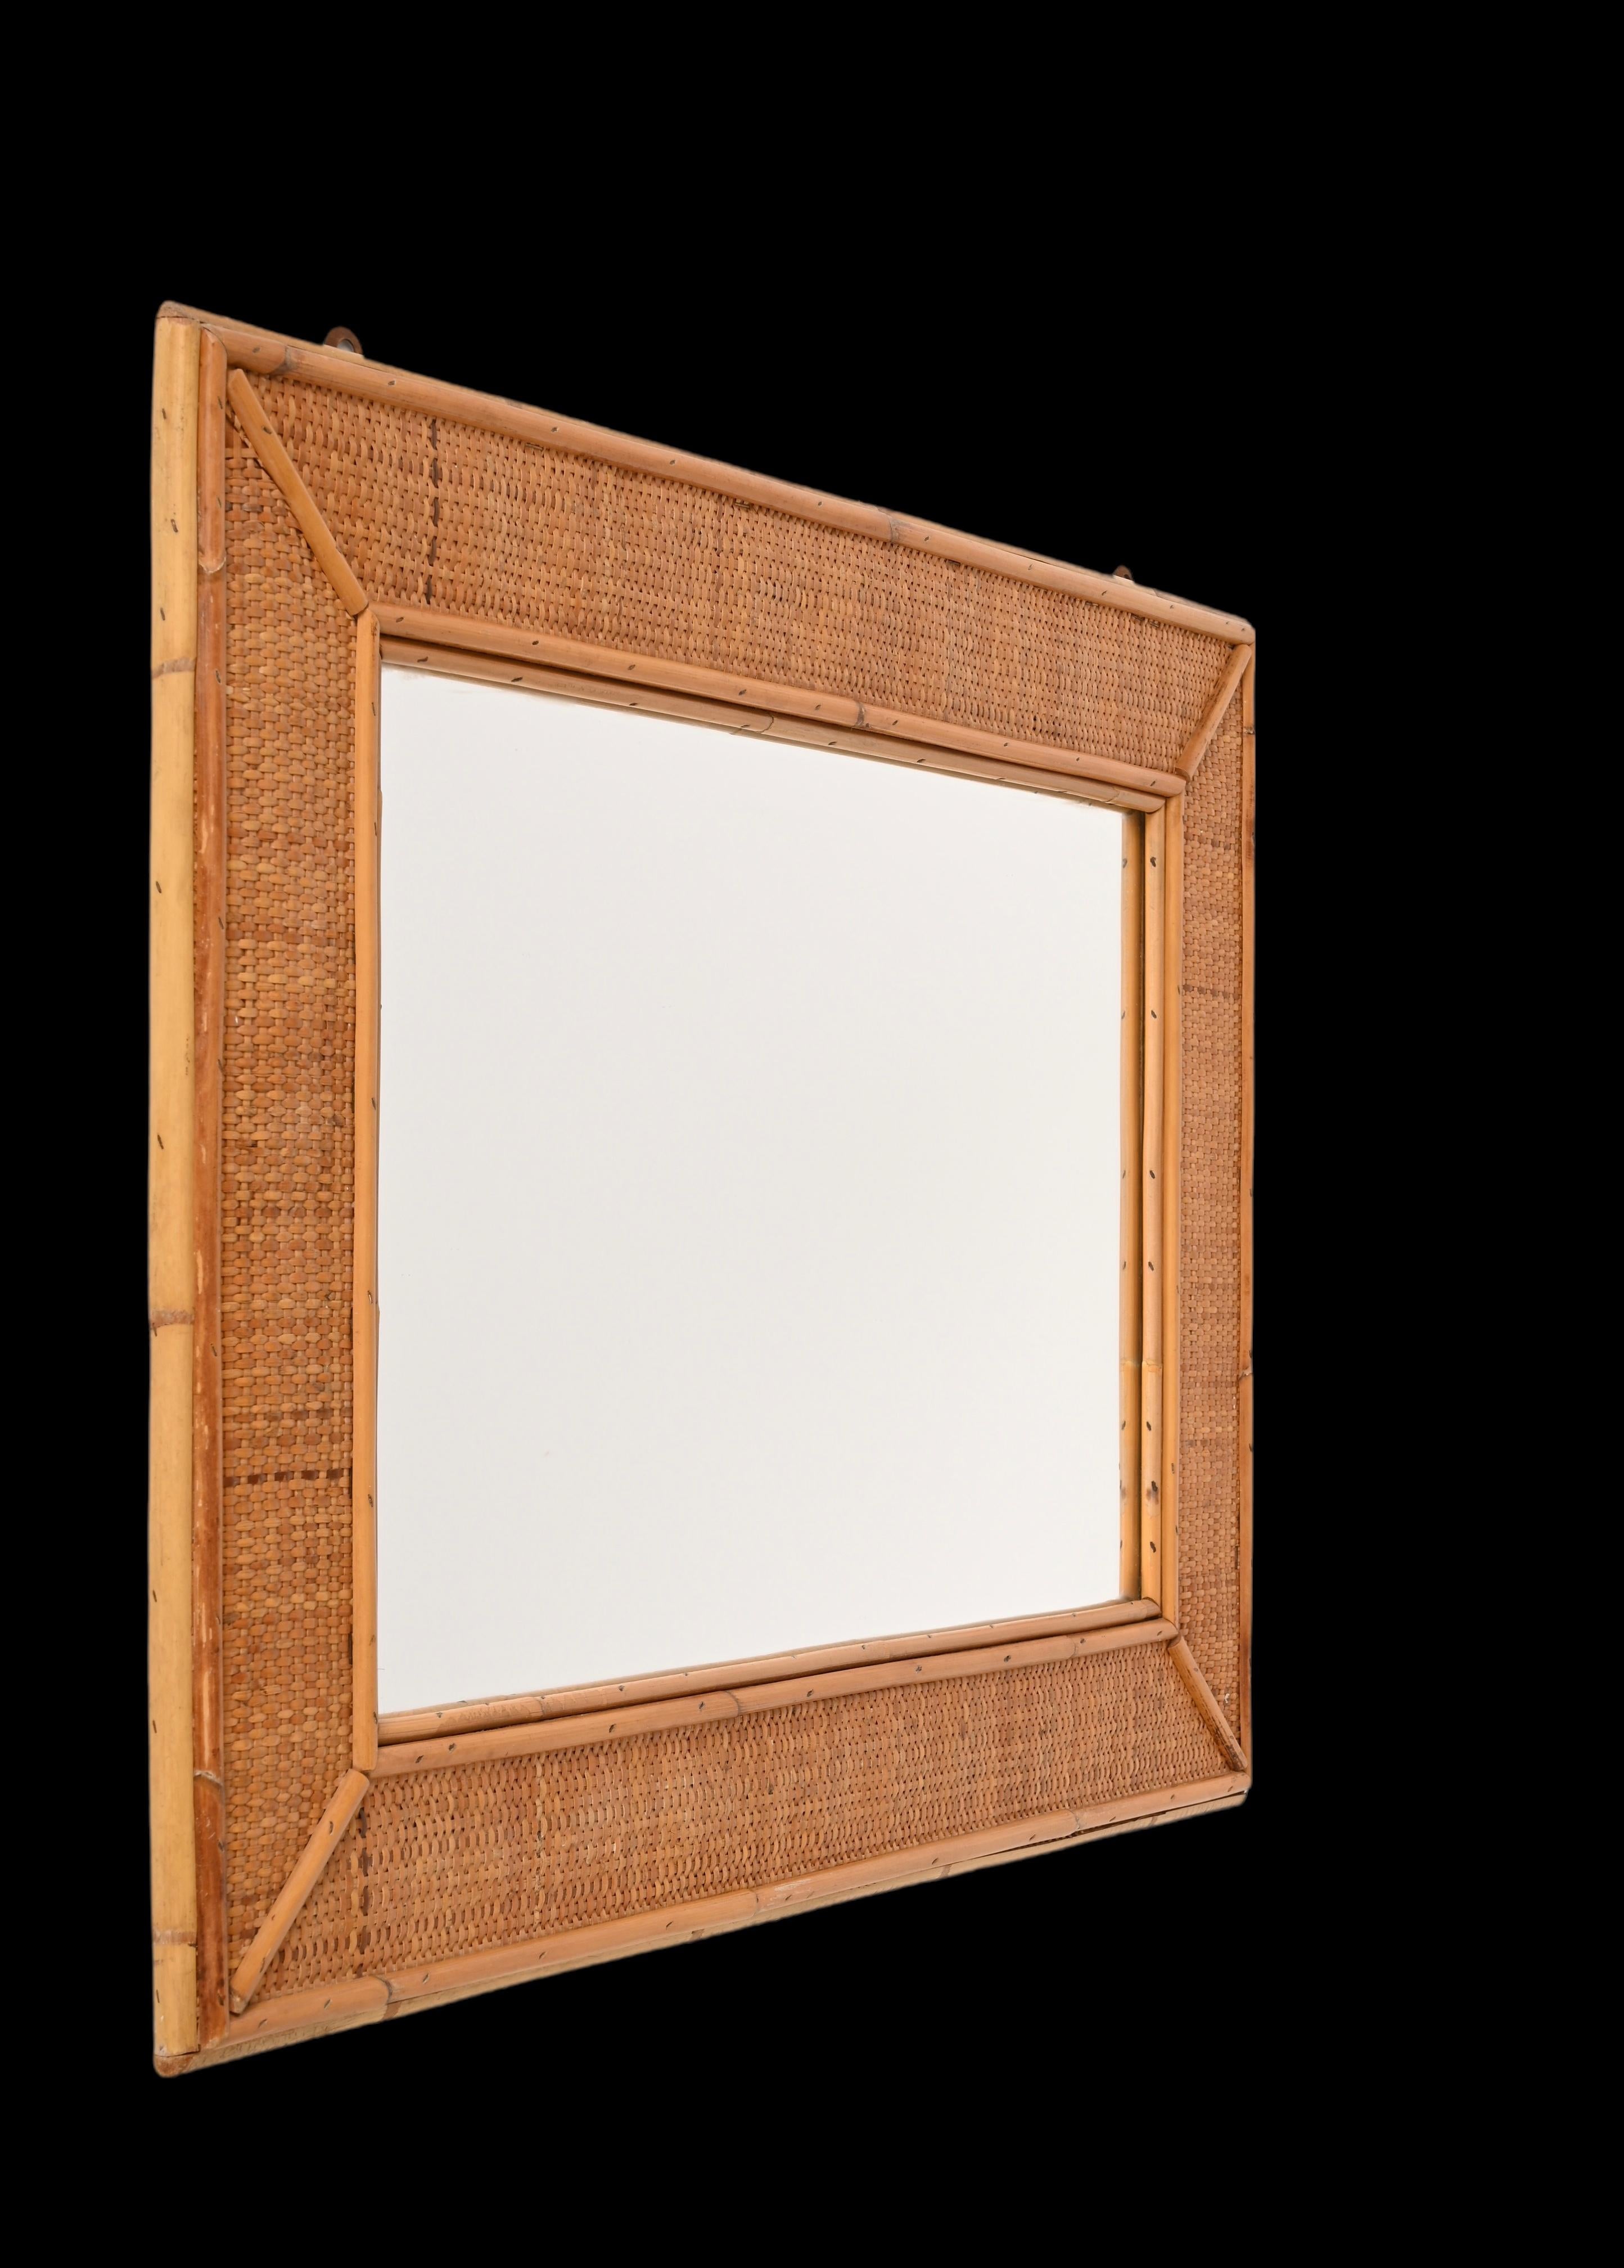 Midcentury Rectangular Italian Mirror with Bamboo and Woven Wicker Frame, 1970s For Sale 5